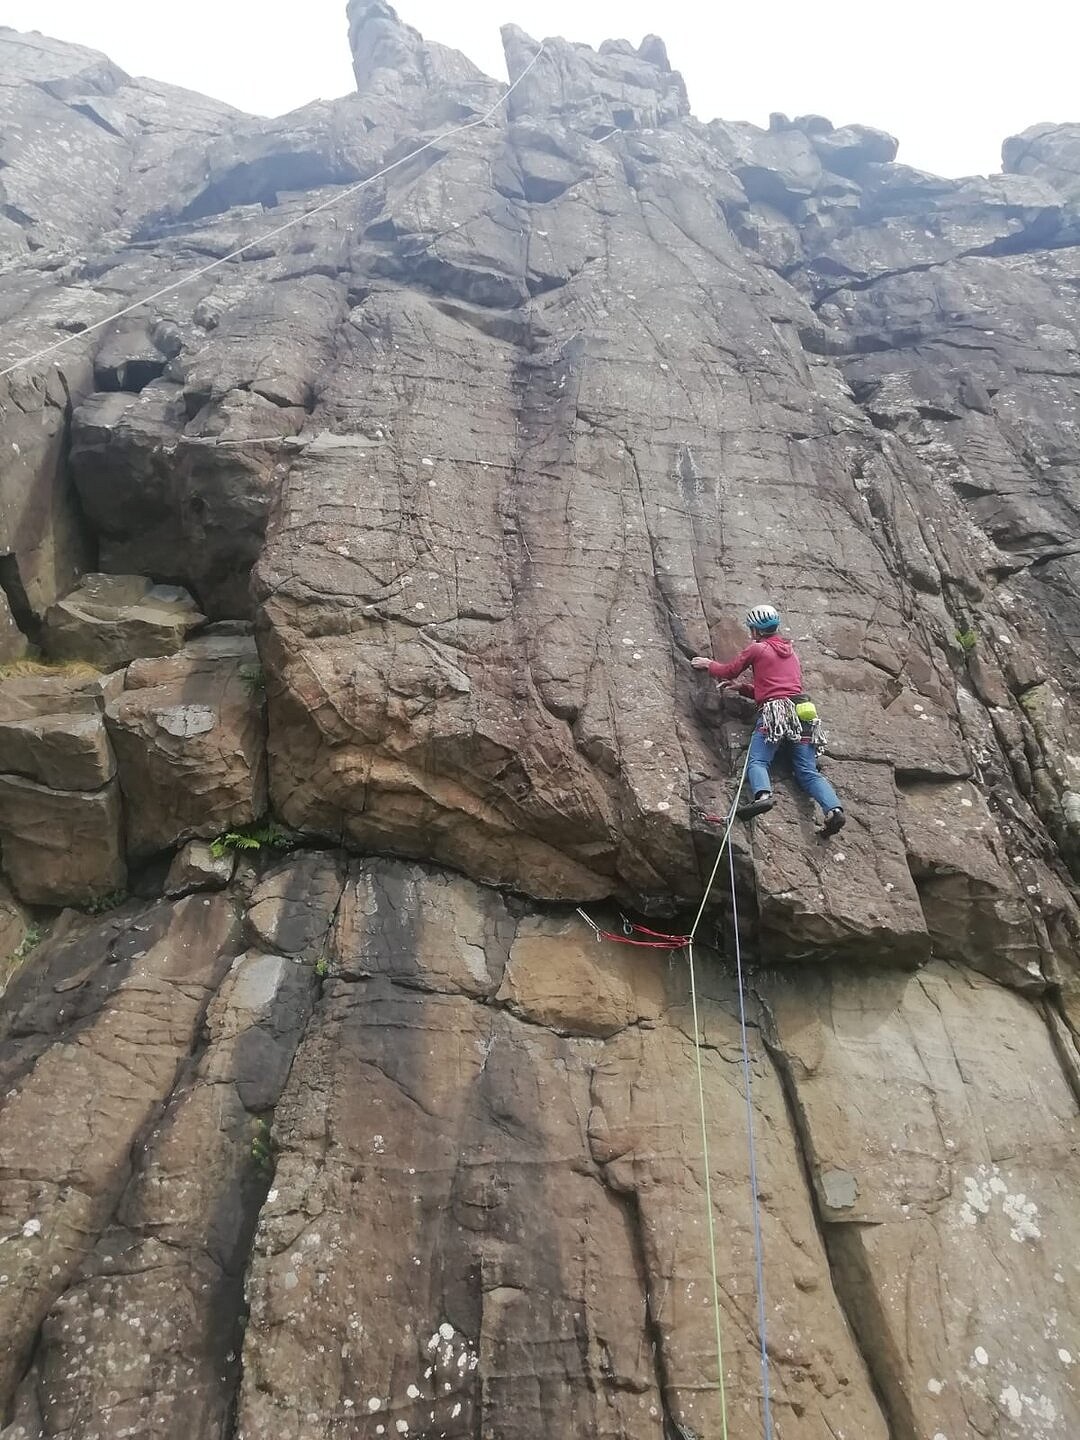 Andy Moles on the FA of Rogues Wall E5 6a  © Tom Wild